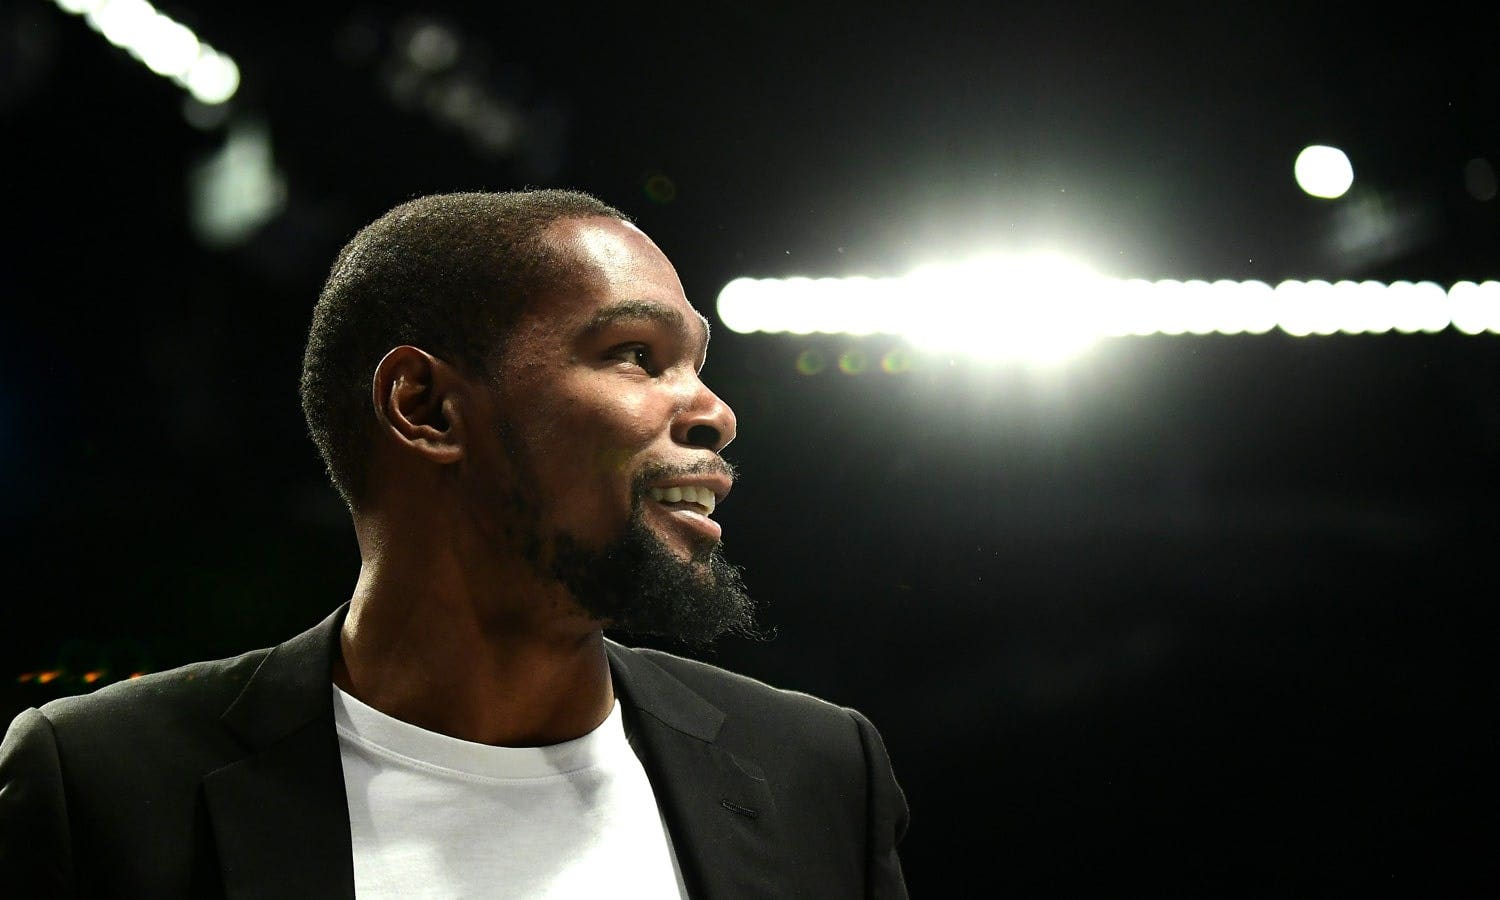 Kevin Durant Says NBA Players Should Be Allowed To Use Marijuana, Compares It To Wine